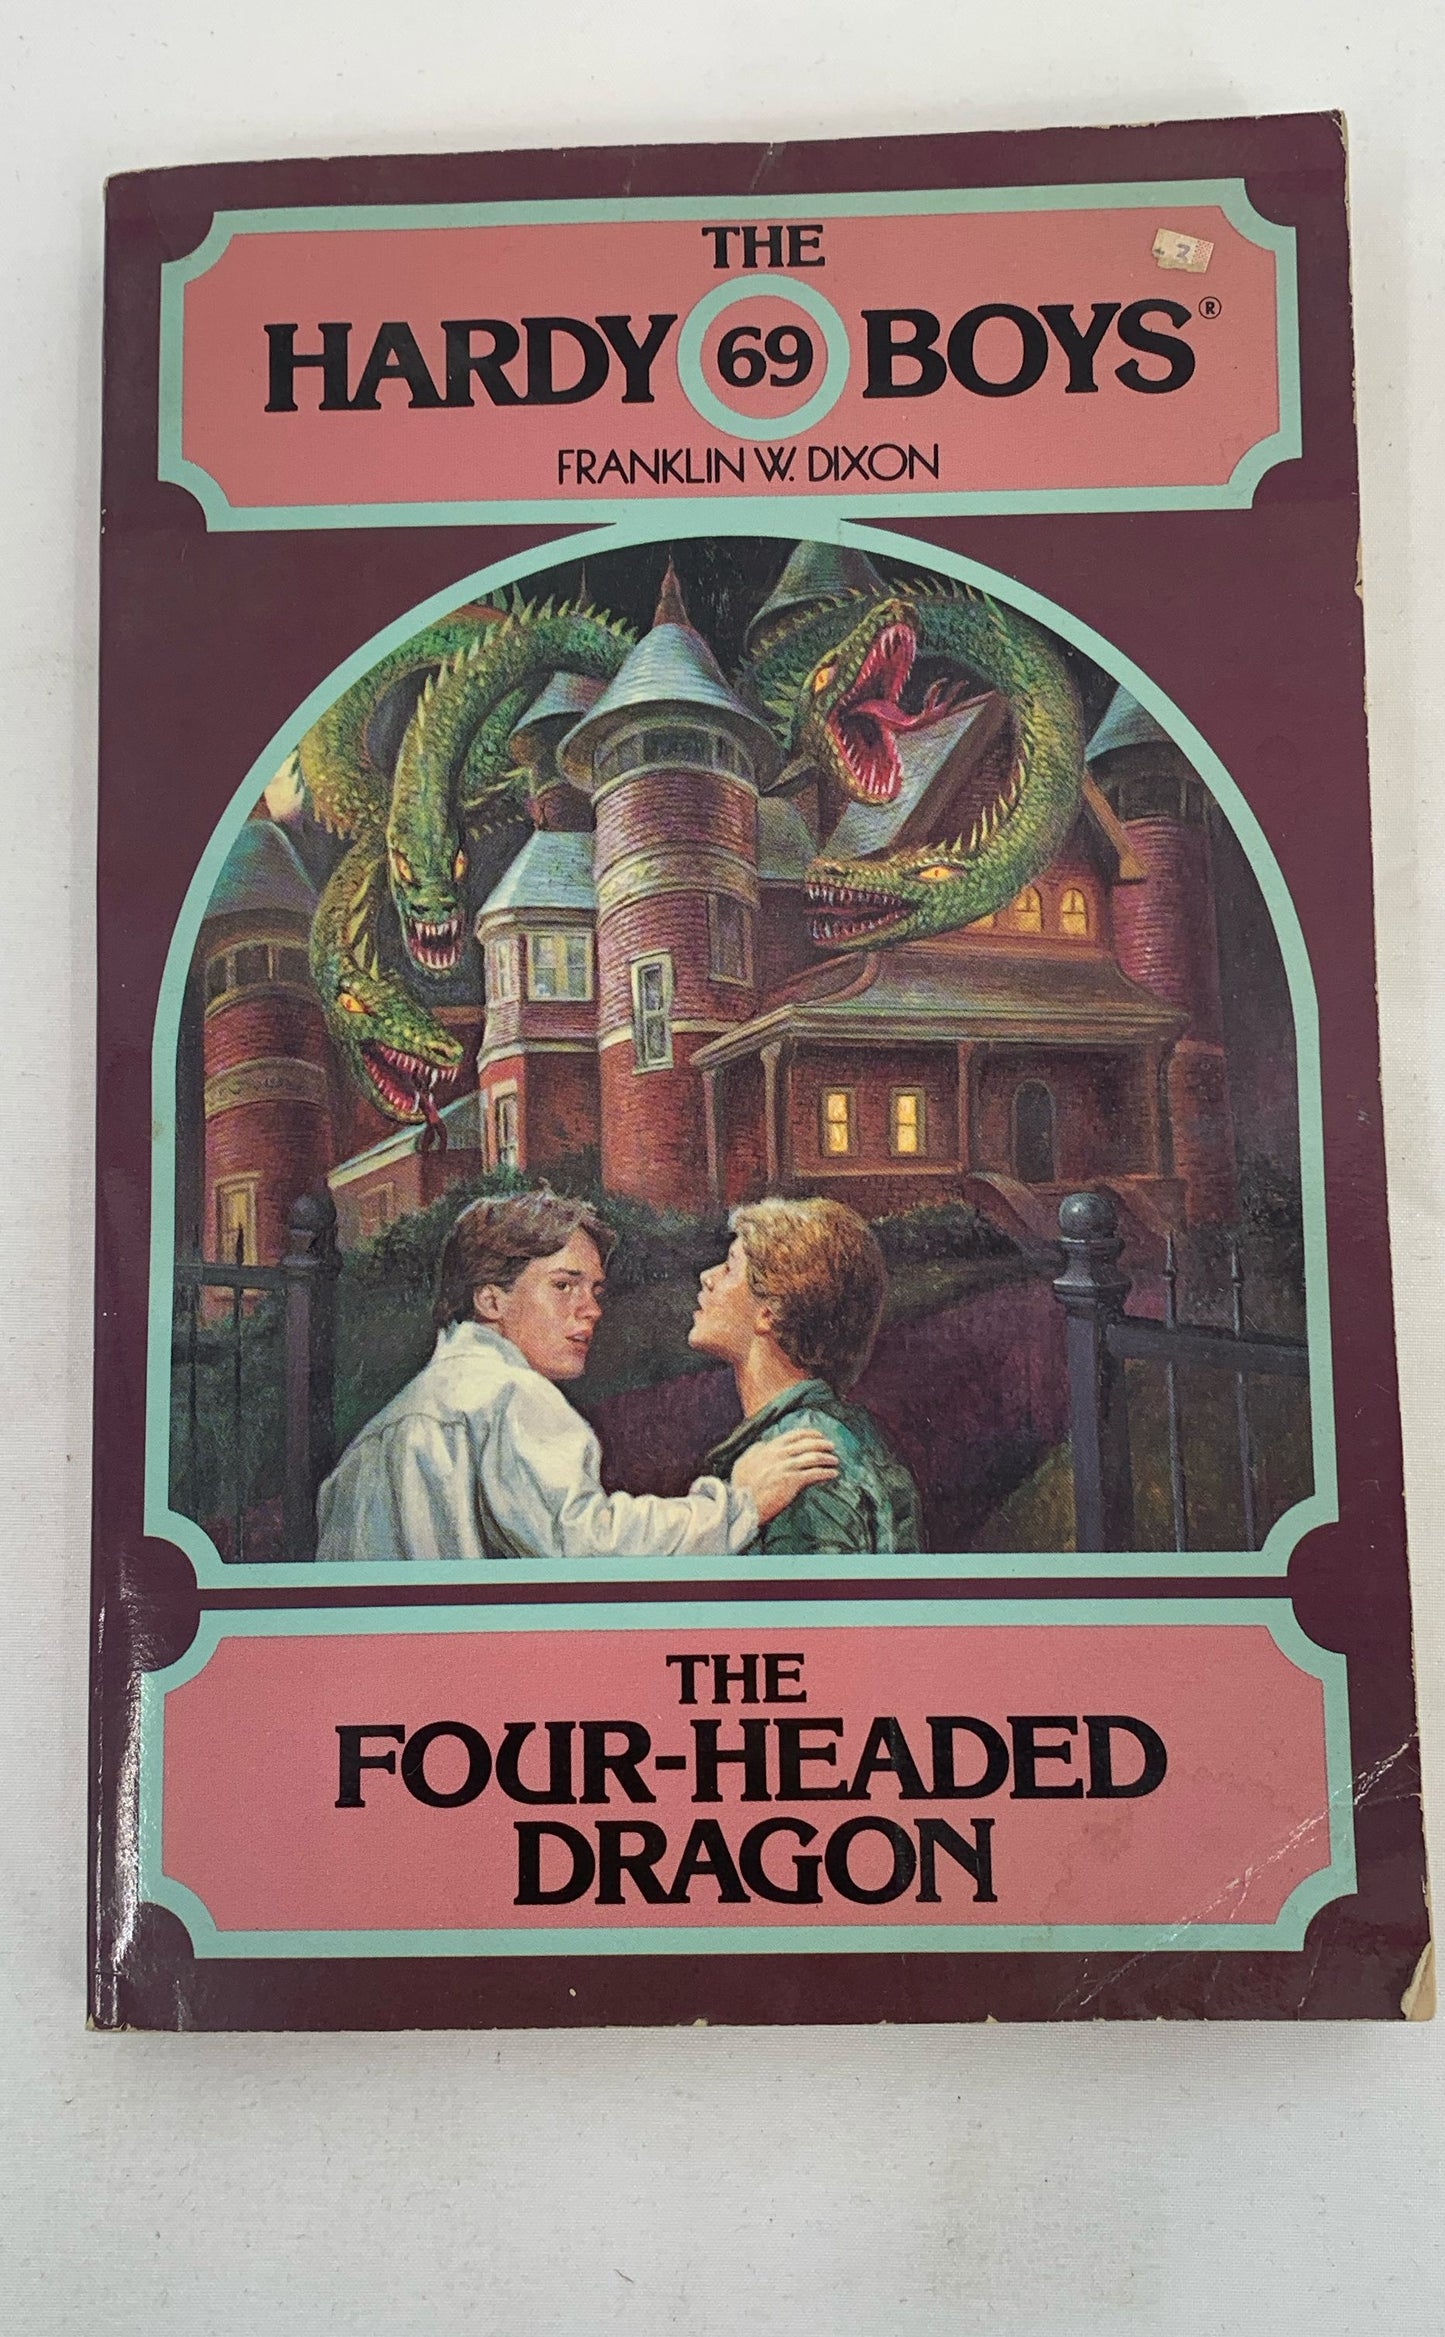 Vintage The Hardy Boys Mixed Lot Of 3 Books